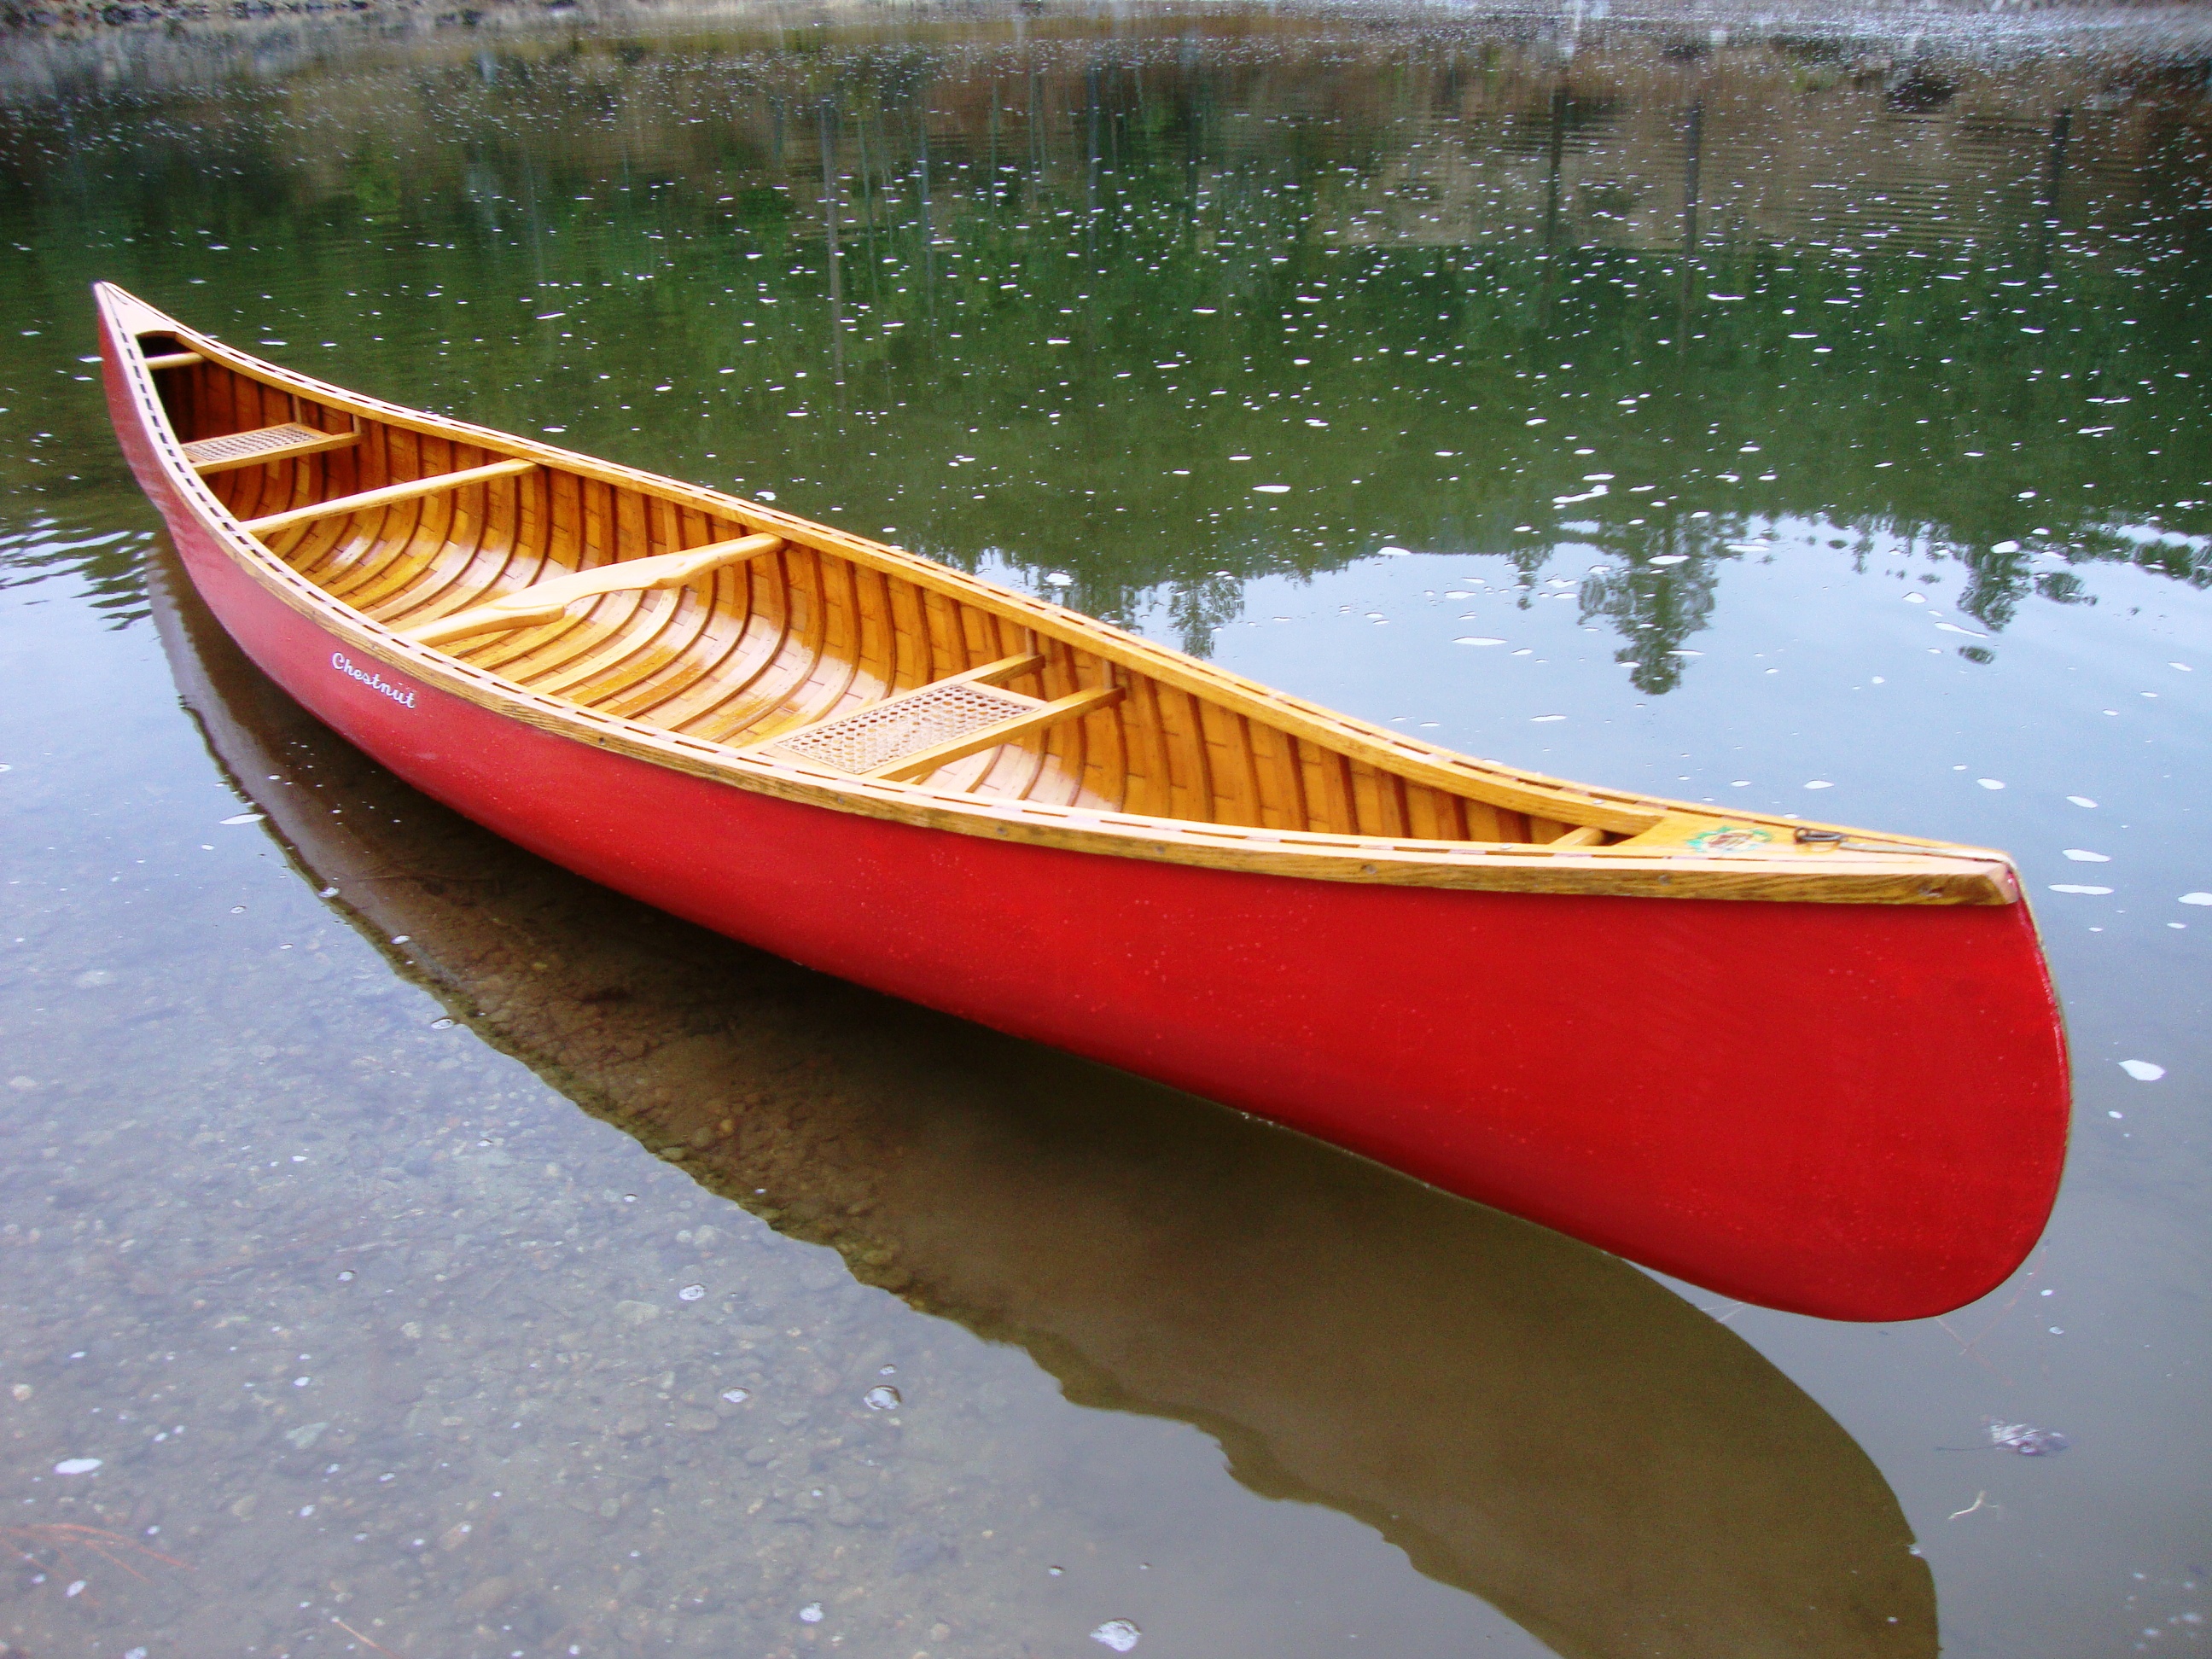 Chestnut produced over 50 different canoes in a wide variety of models 